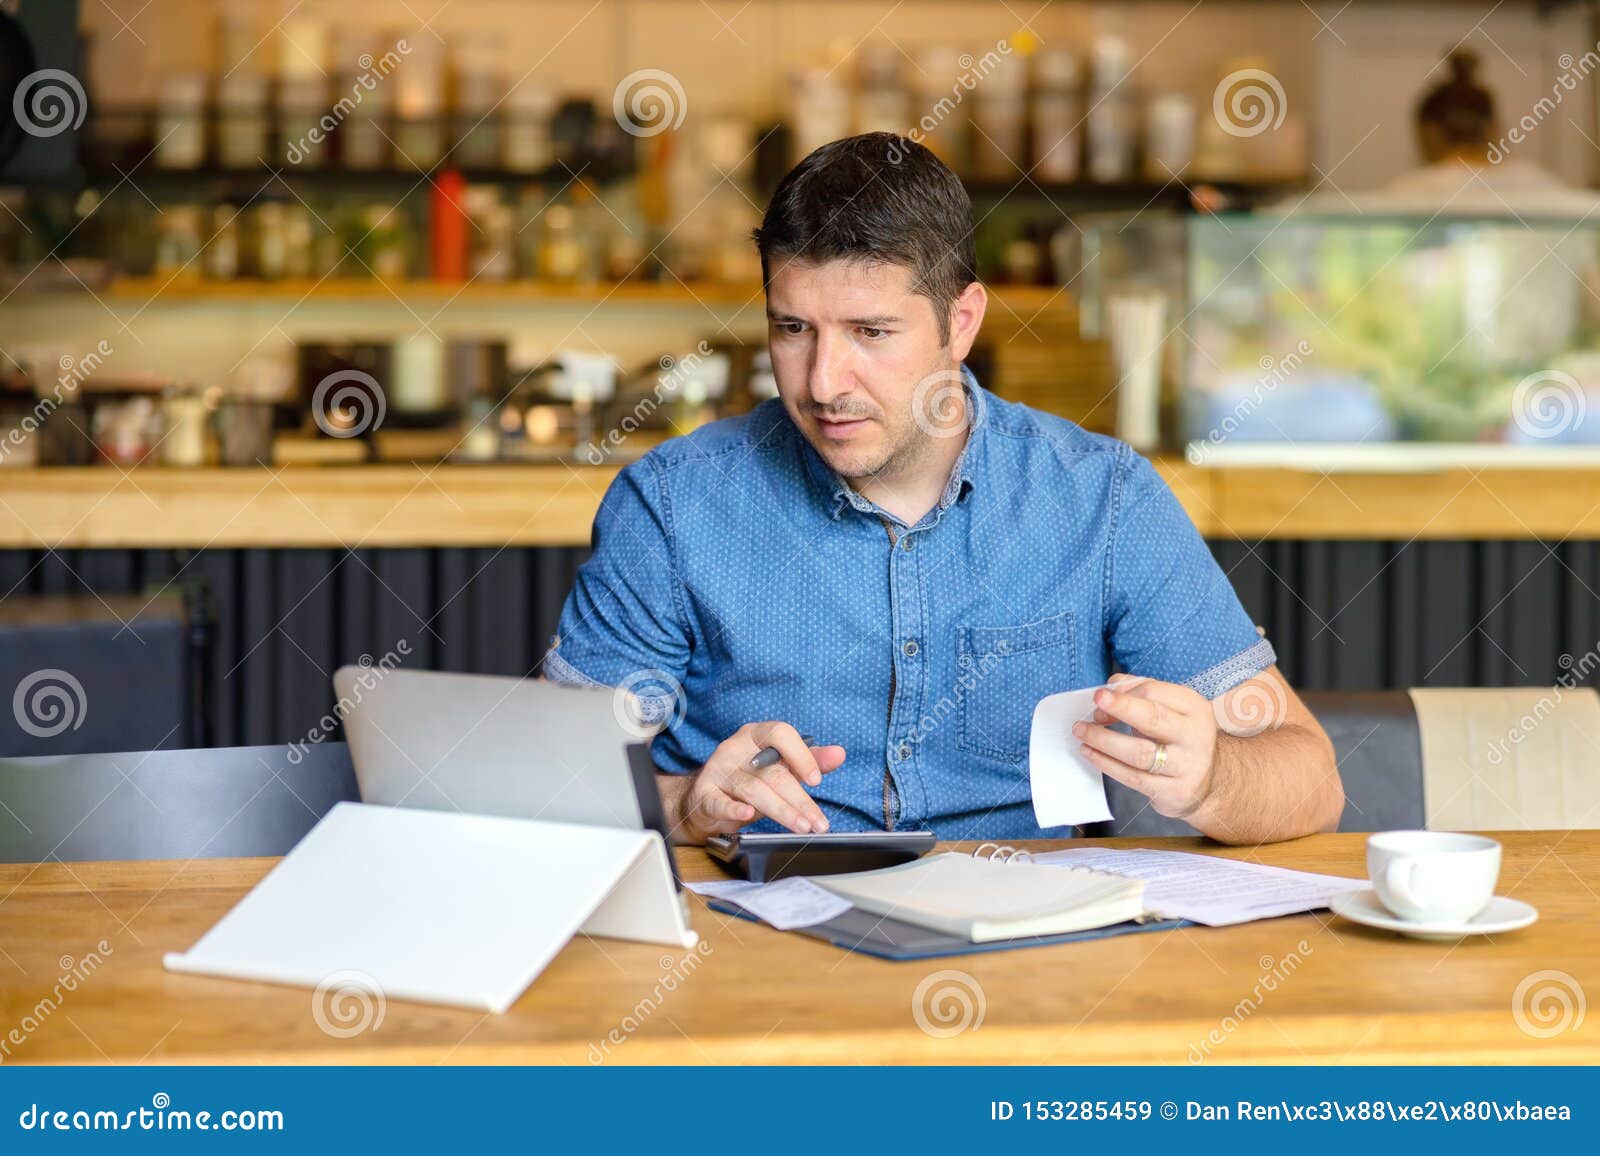 mature small business owner calculating finance bills of activity, entrepreneur using laptop and calculator to work